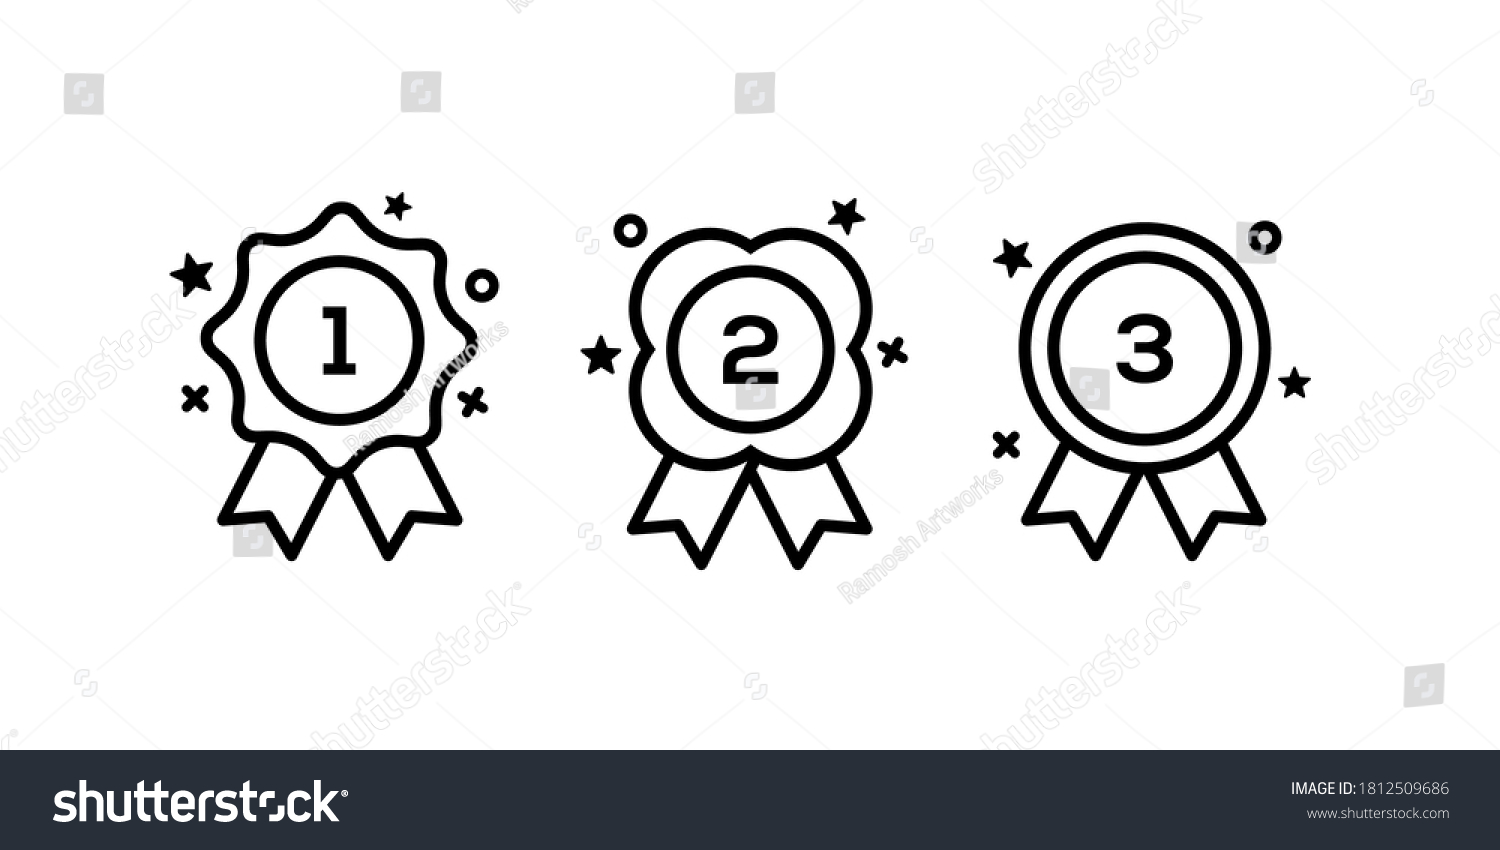 set collection of medal champion for first second and third place, 1st 2nd 3rd in black line icon Vector illustration graphic art sticker design. #1812509686